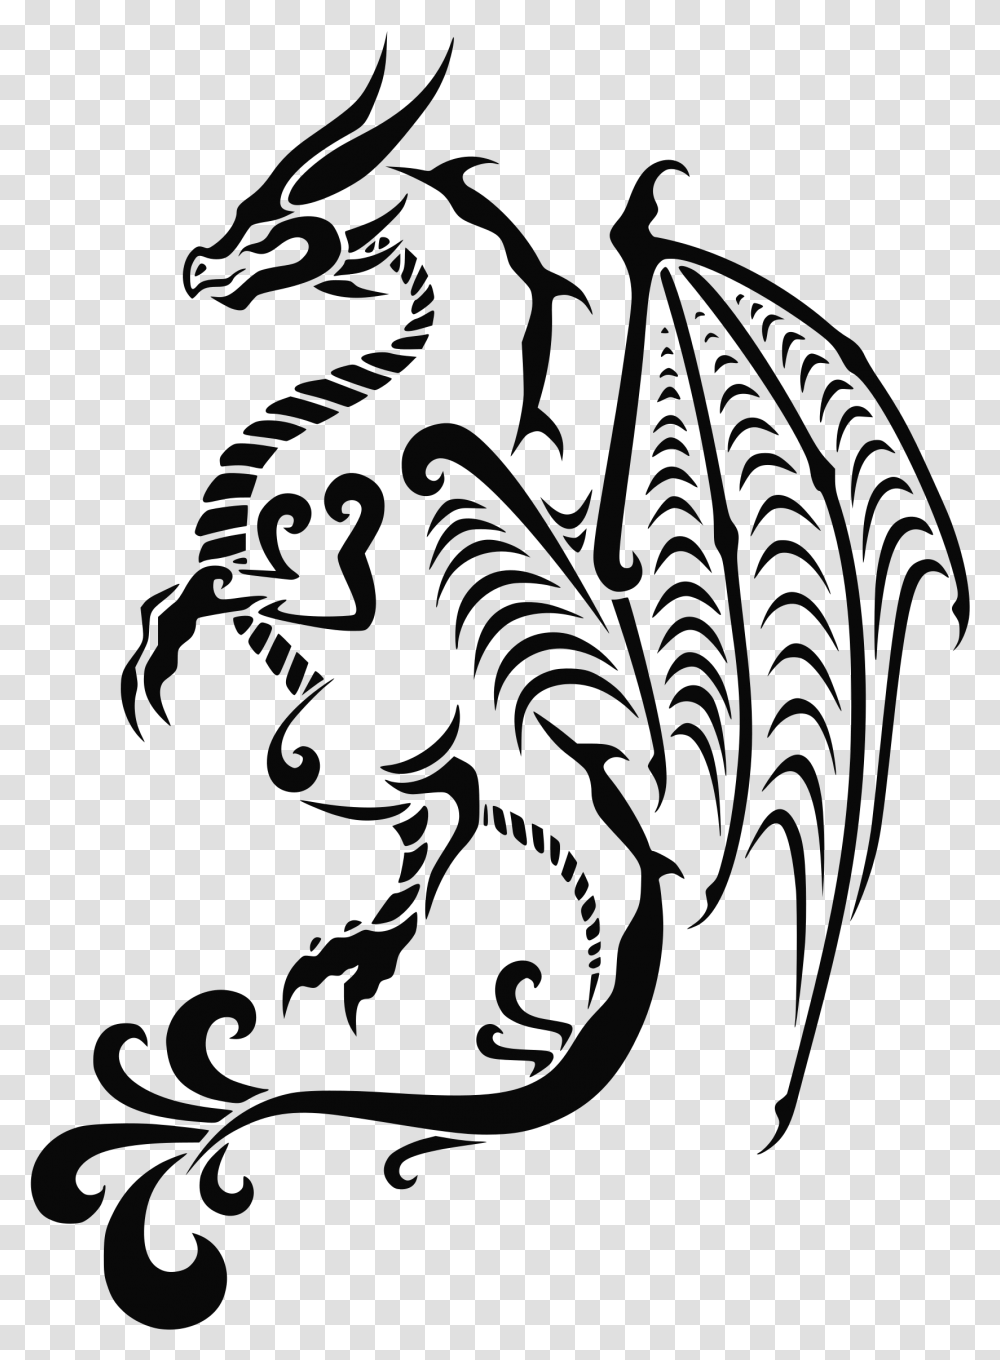 Dragon Tattoo Clip Arts Dragon Black And White Clipart Transparent Png